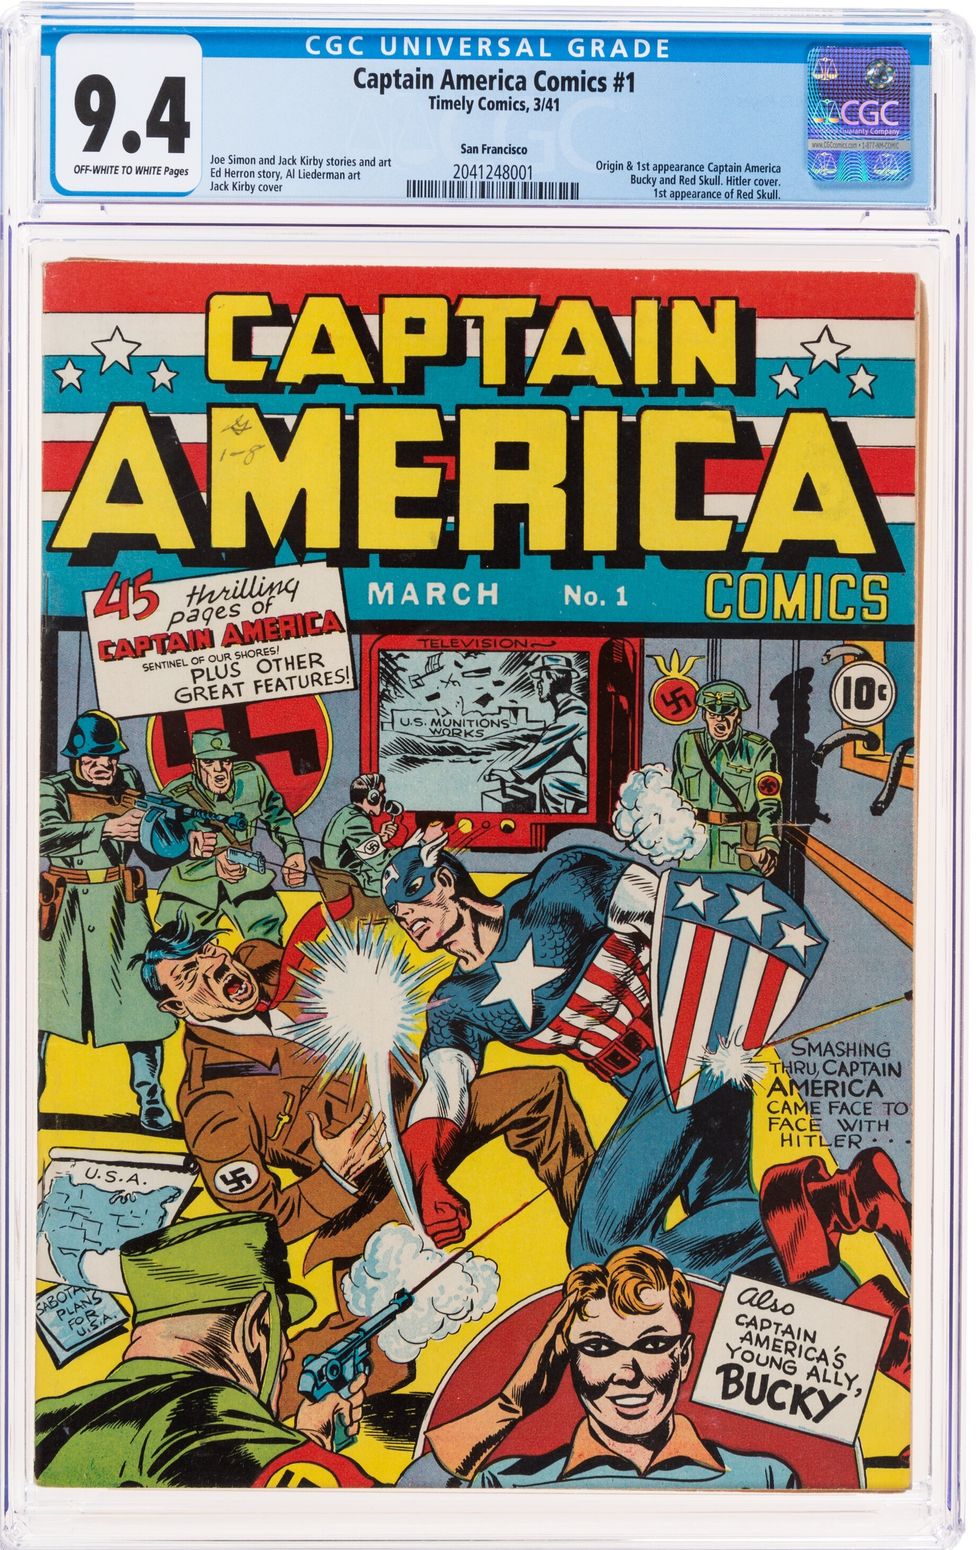 Near-mint condition of first Captain America Comic sells for over £2.3 million